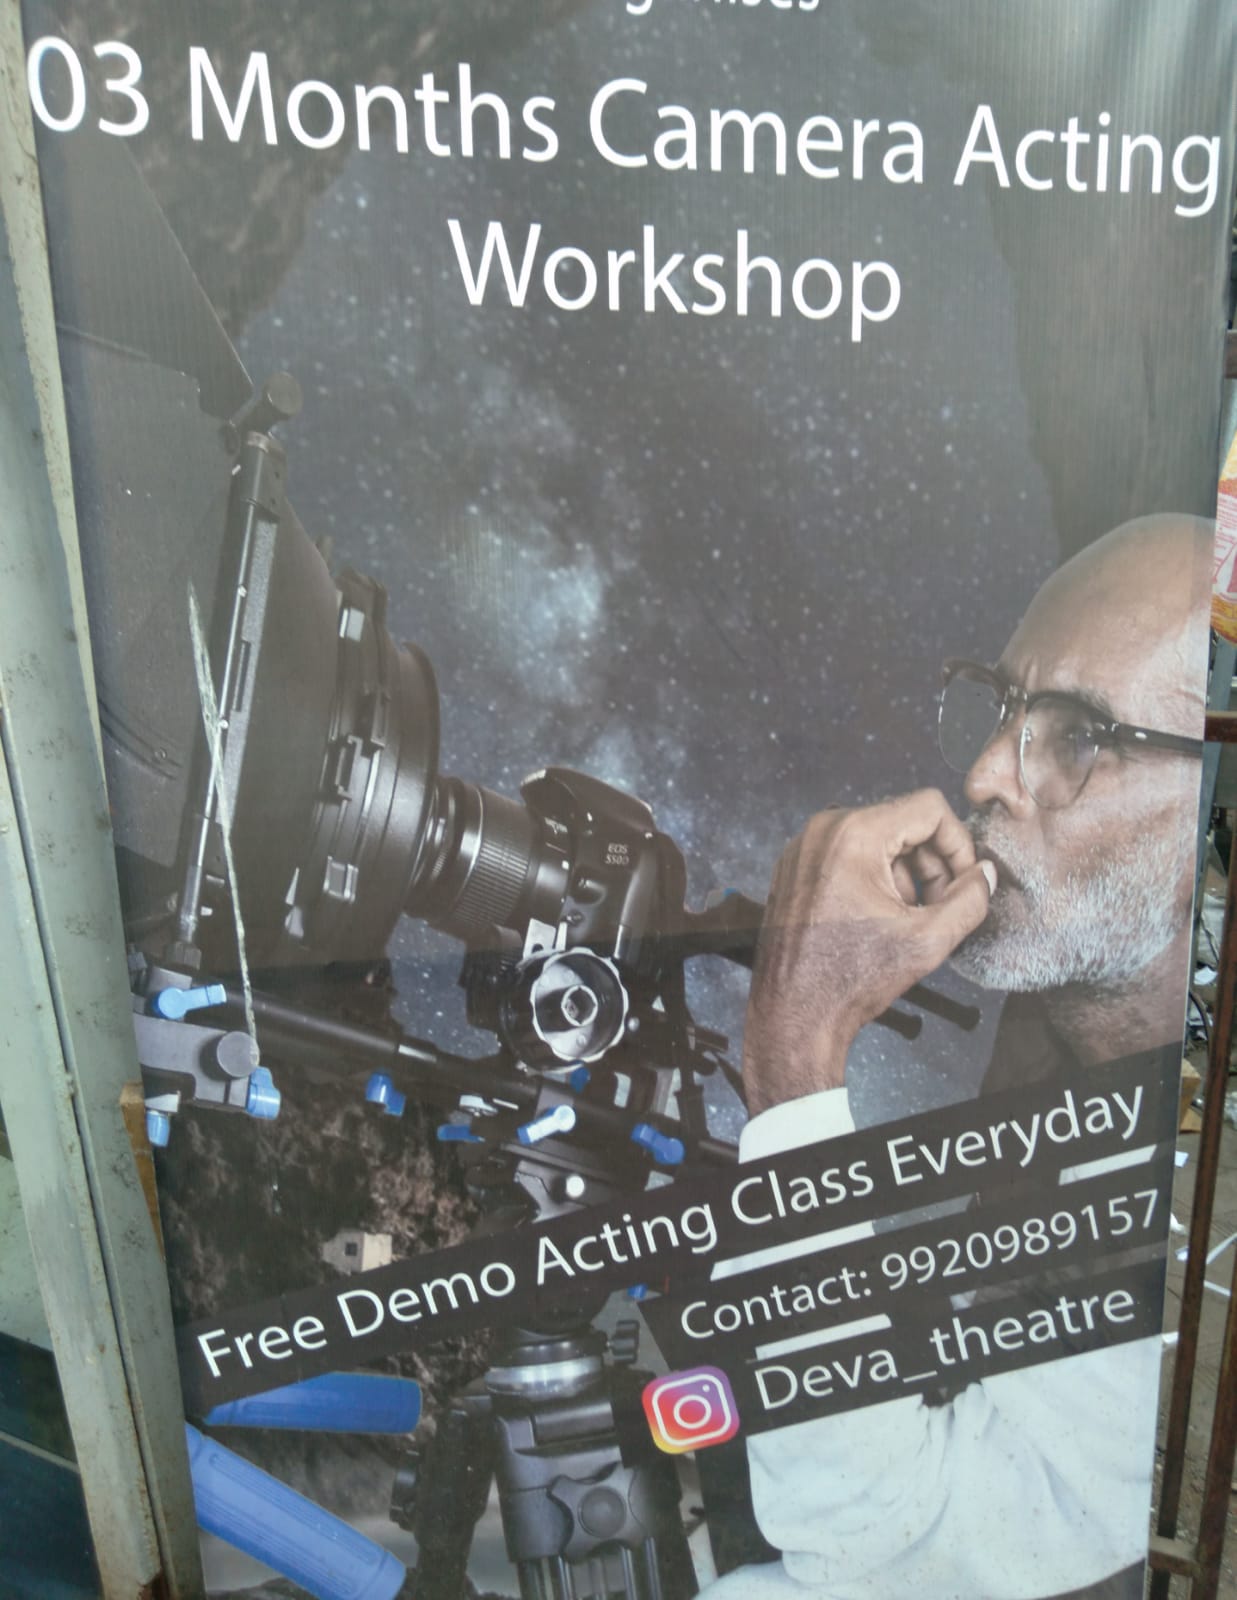 Free demo acting class launched under the aegis of Deva Theater Group